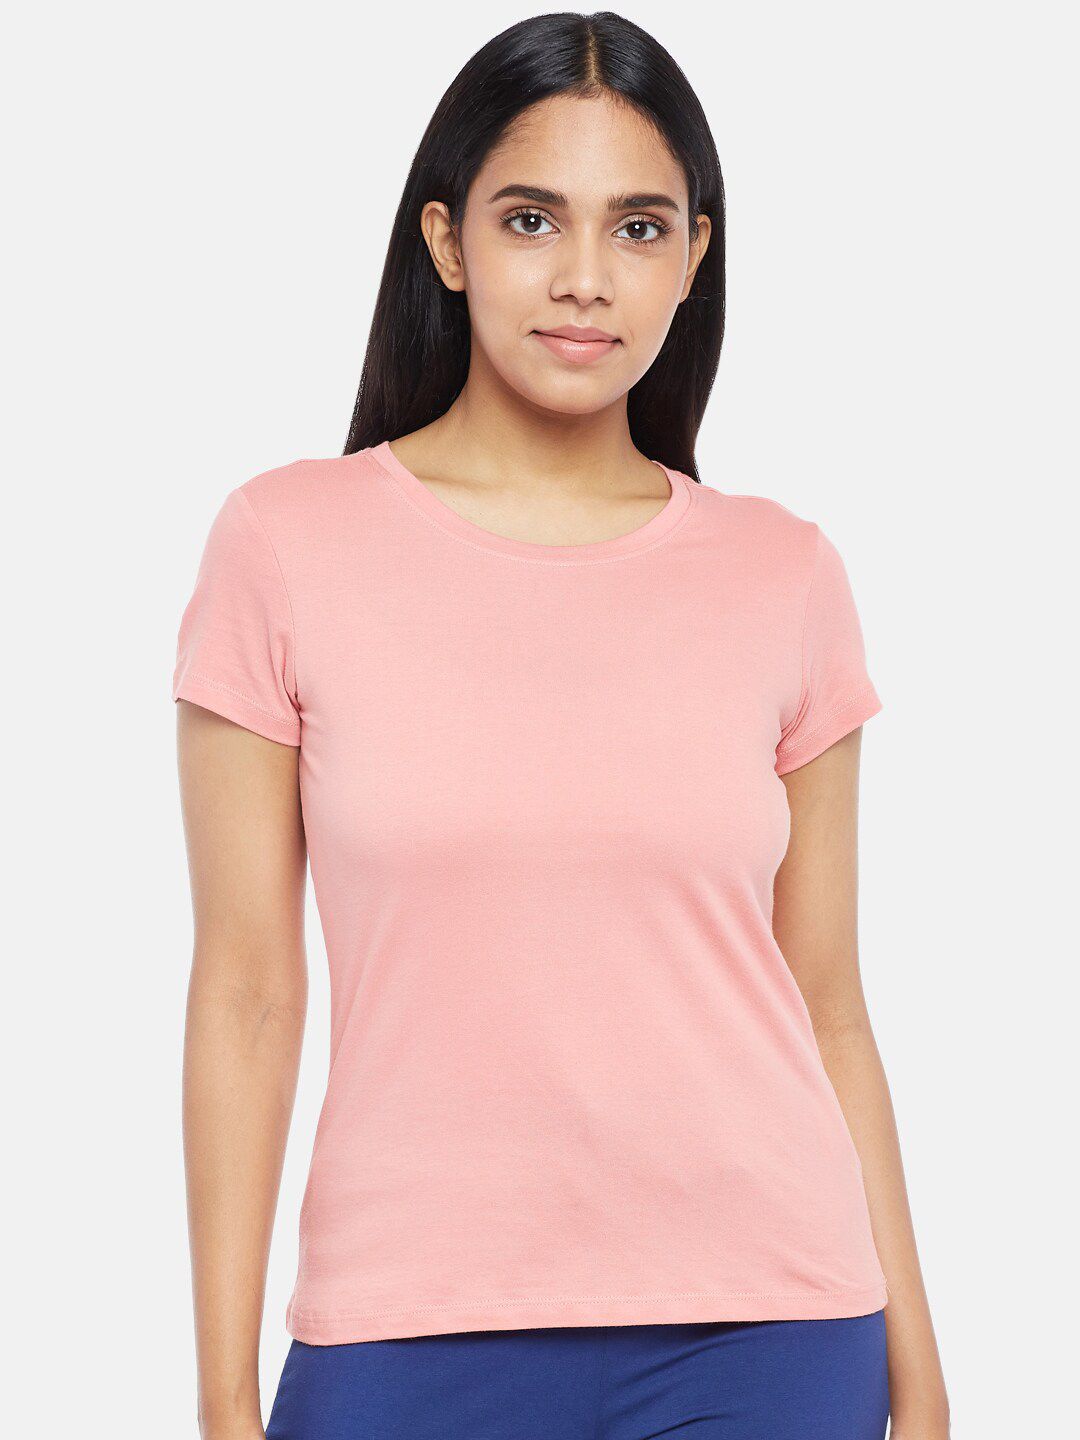 Dreamz by Pantaloons Women Pink Solid Pure Cotton Regular Lounge tshirt Price in India